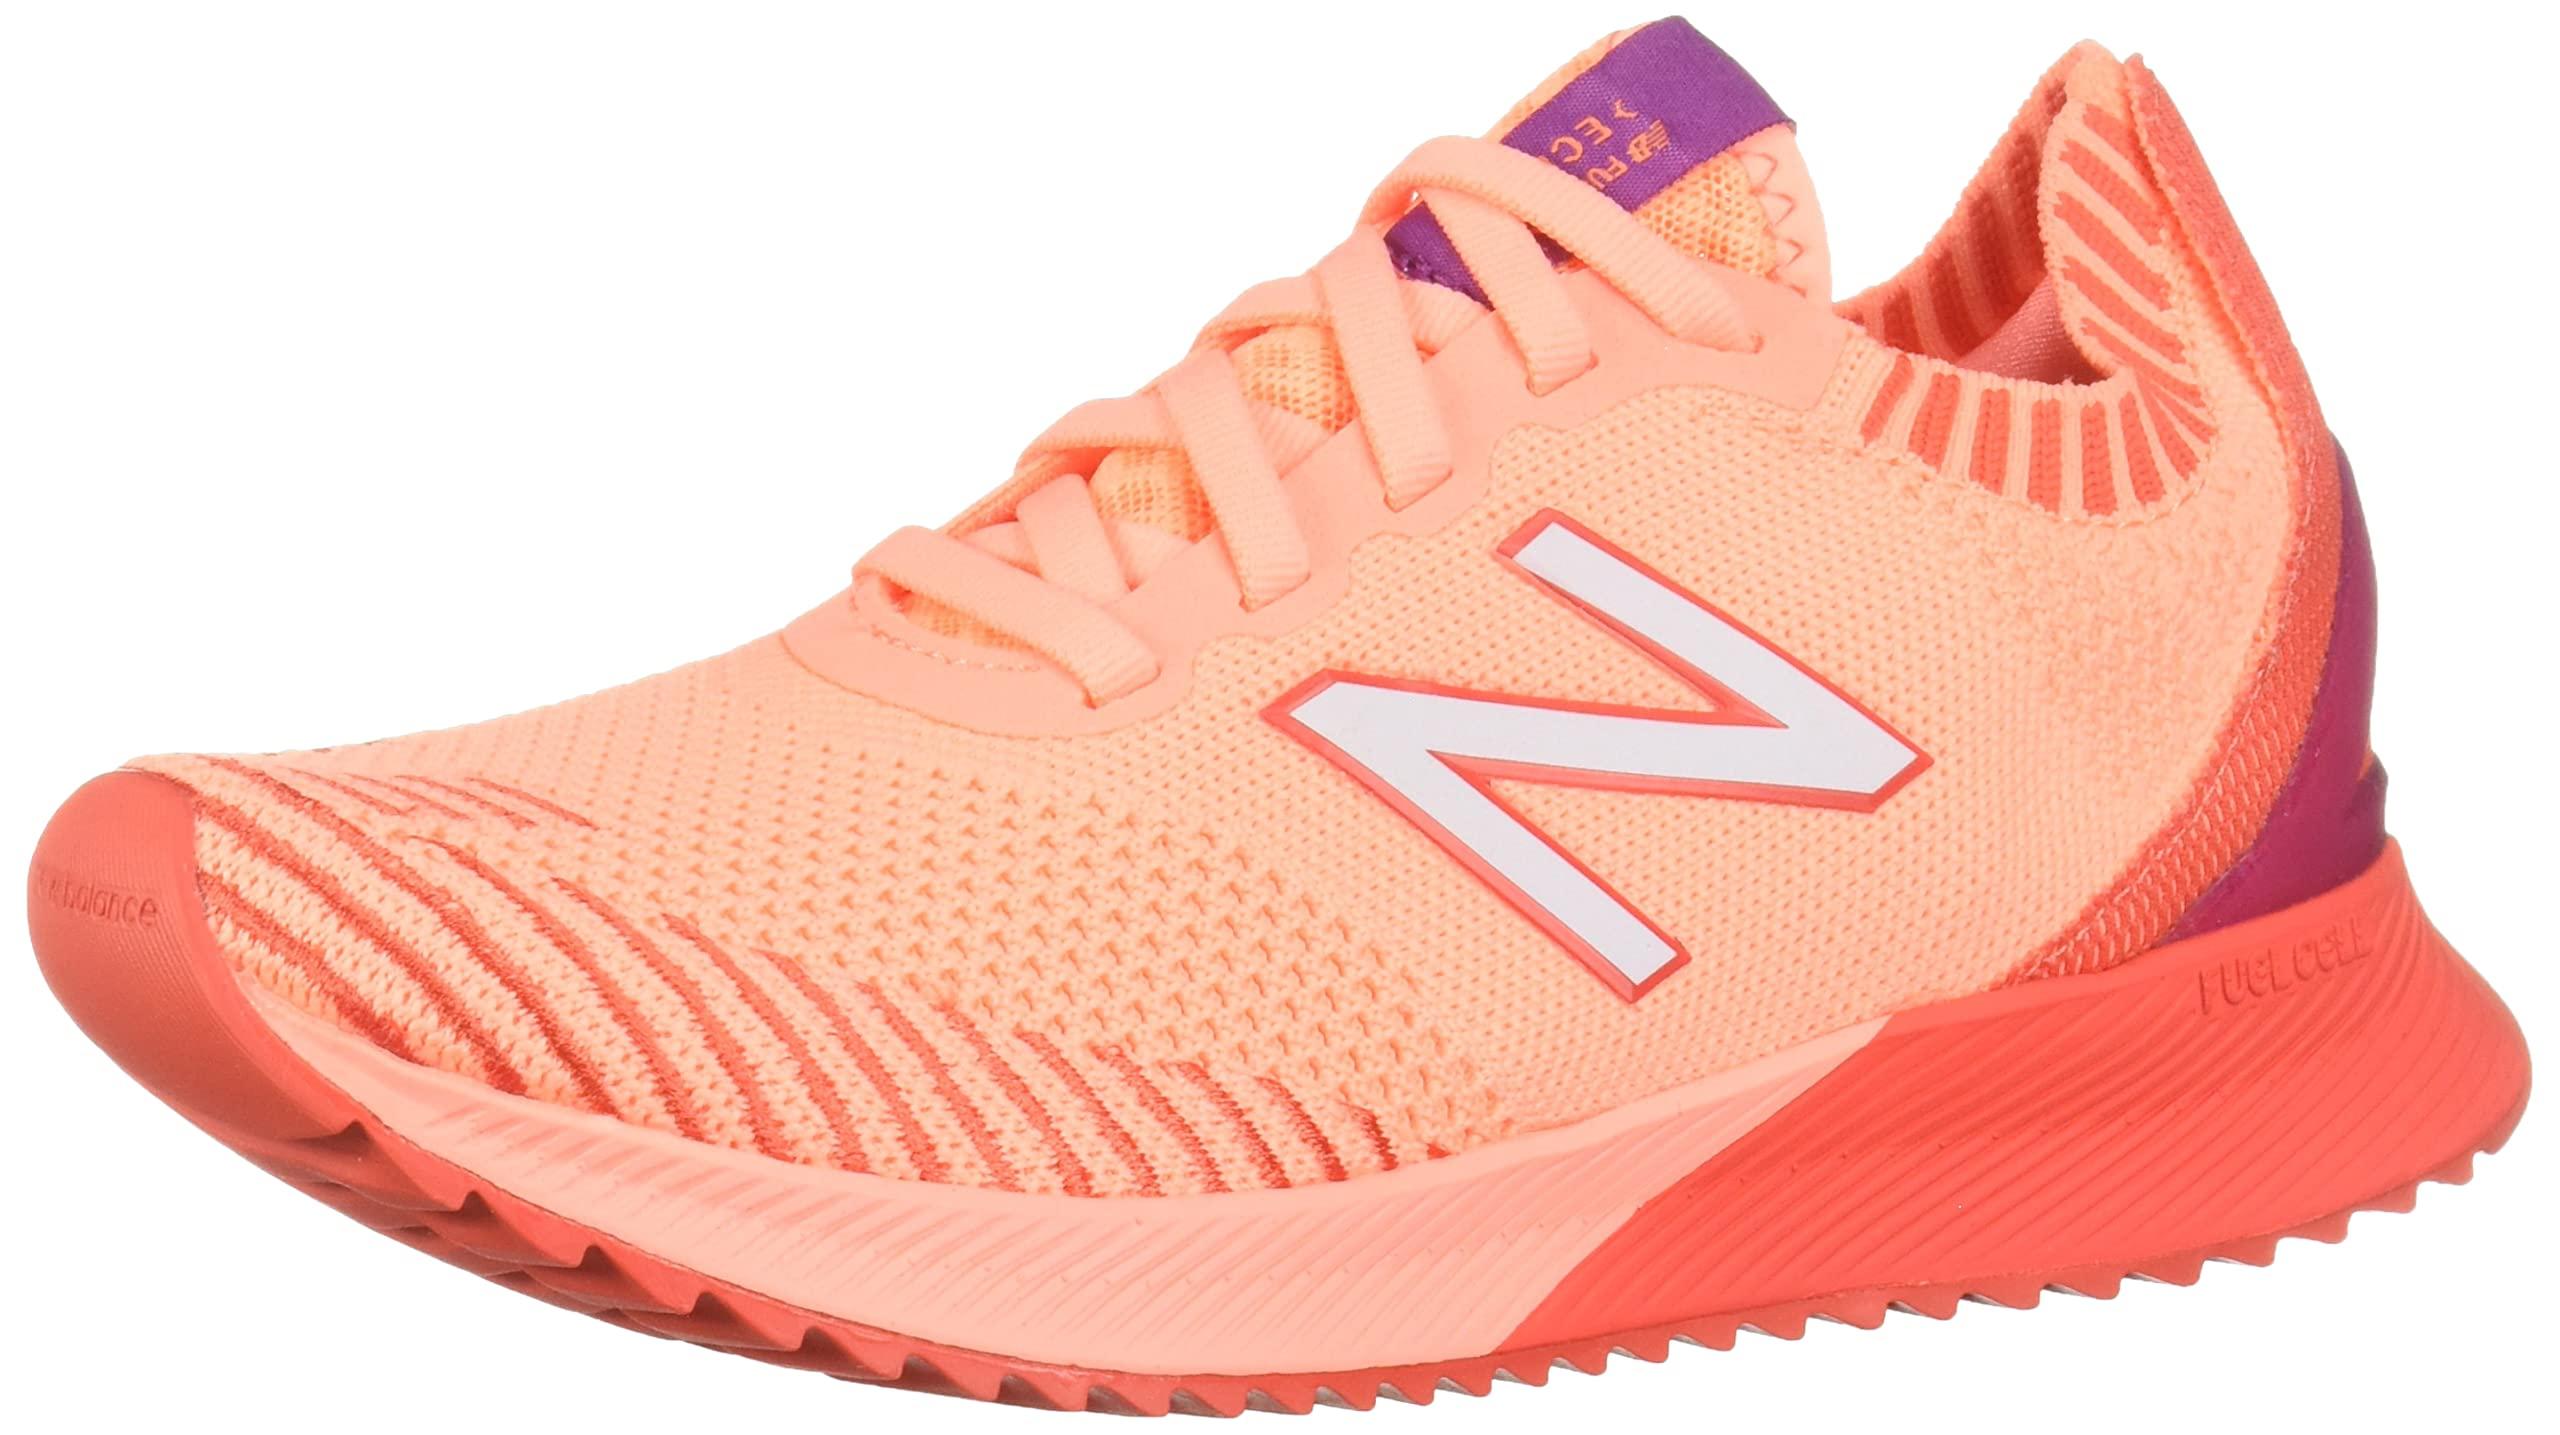 New Balance Echo V1 Fuelcell Walking Shoe in Pink | Lyst